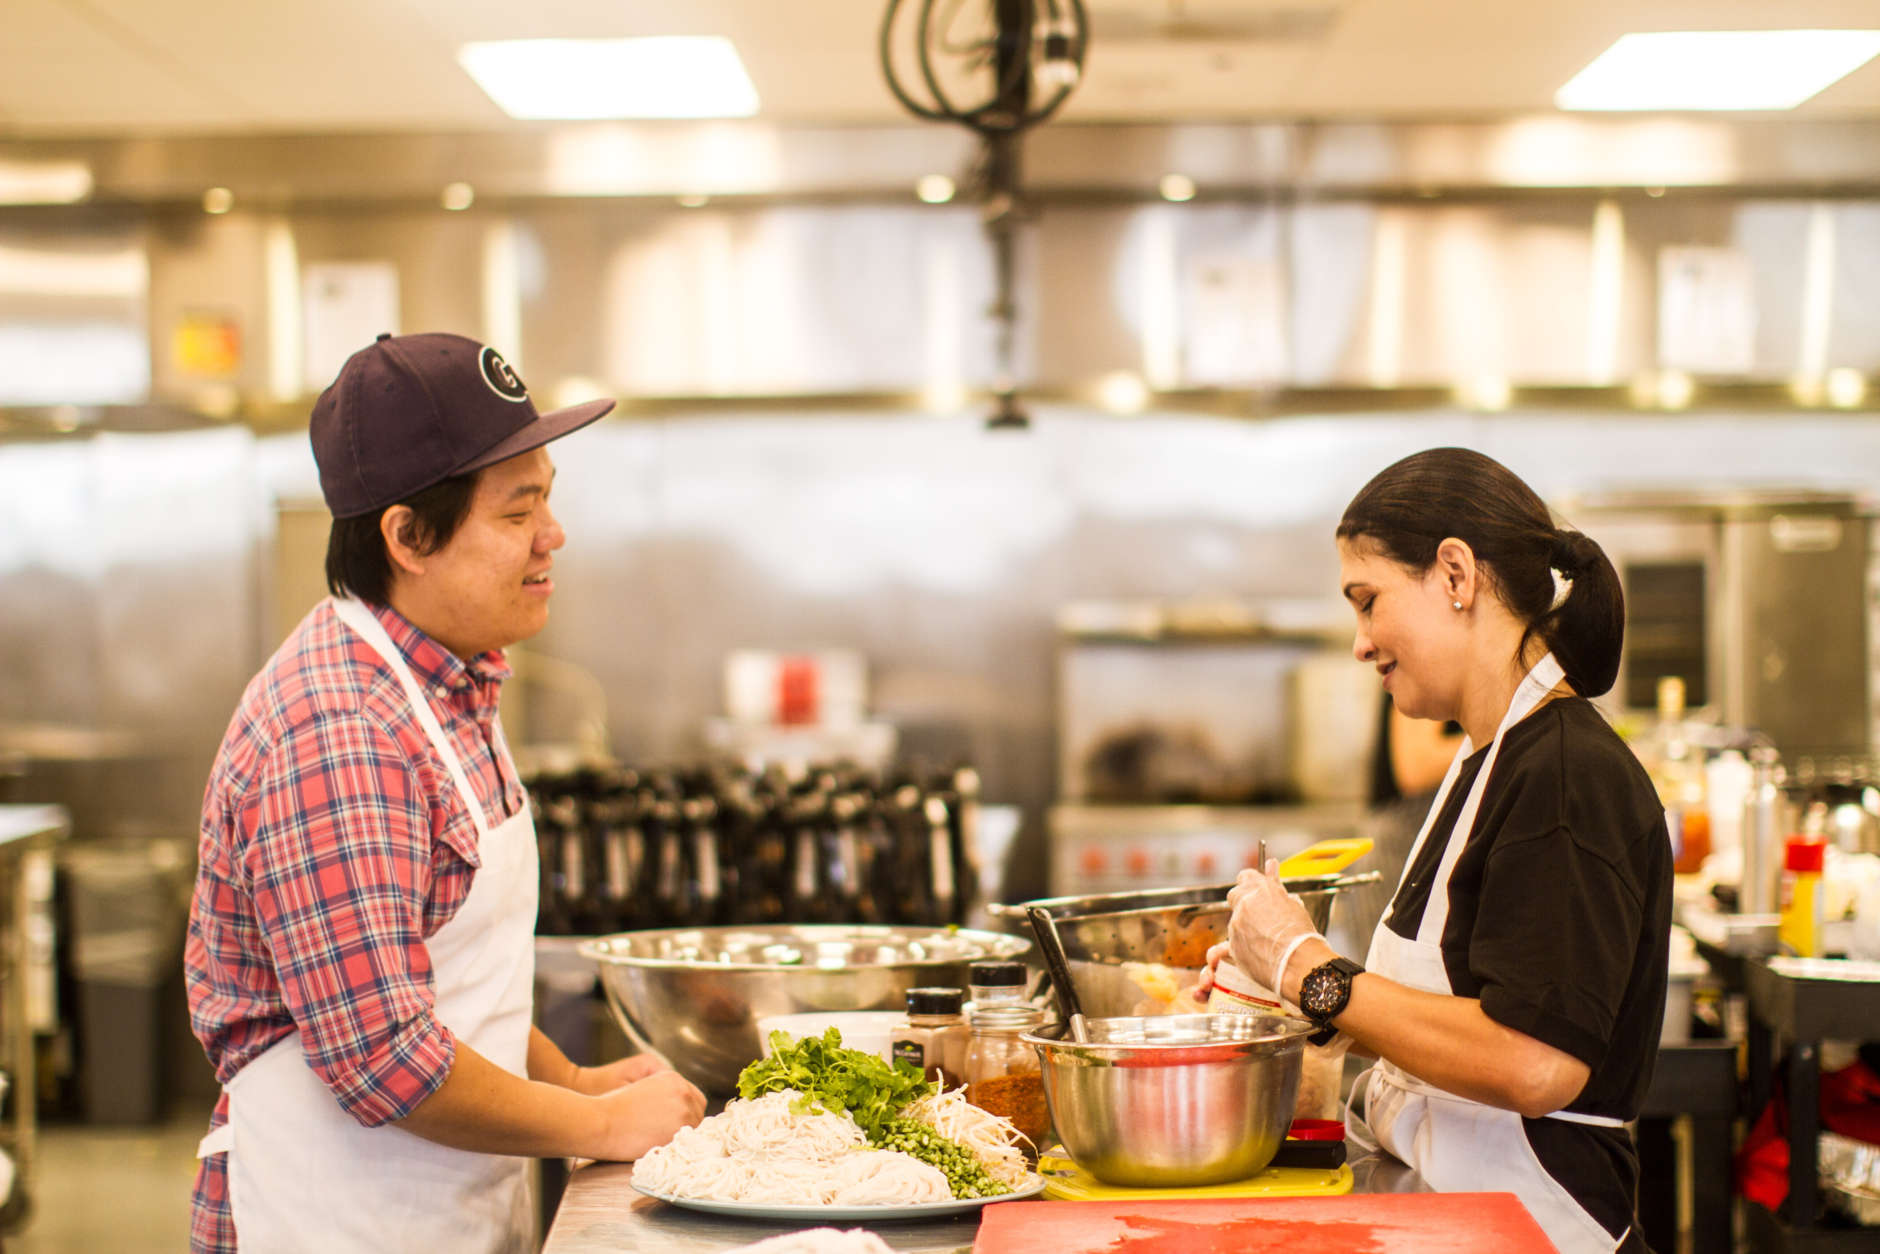 Foodhini is a meal-delivery company that features family-style dishes from global cuisines, all made by emerging immigrant chefs. The startup operates out of Union Kitchen's Ivy City location. (Courtesy Foodhini) 